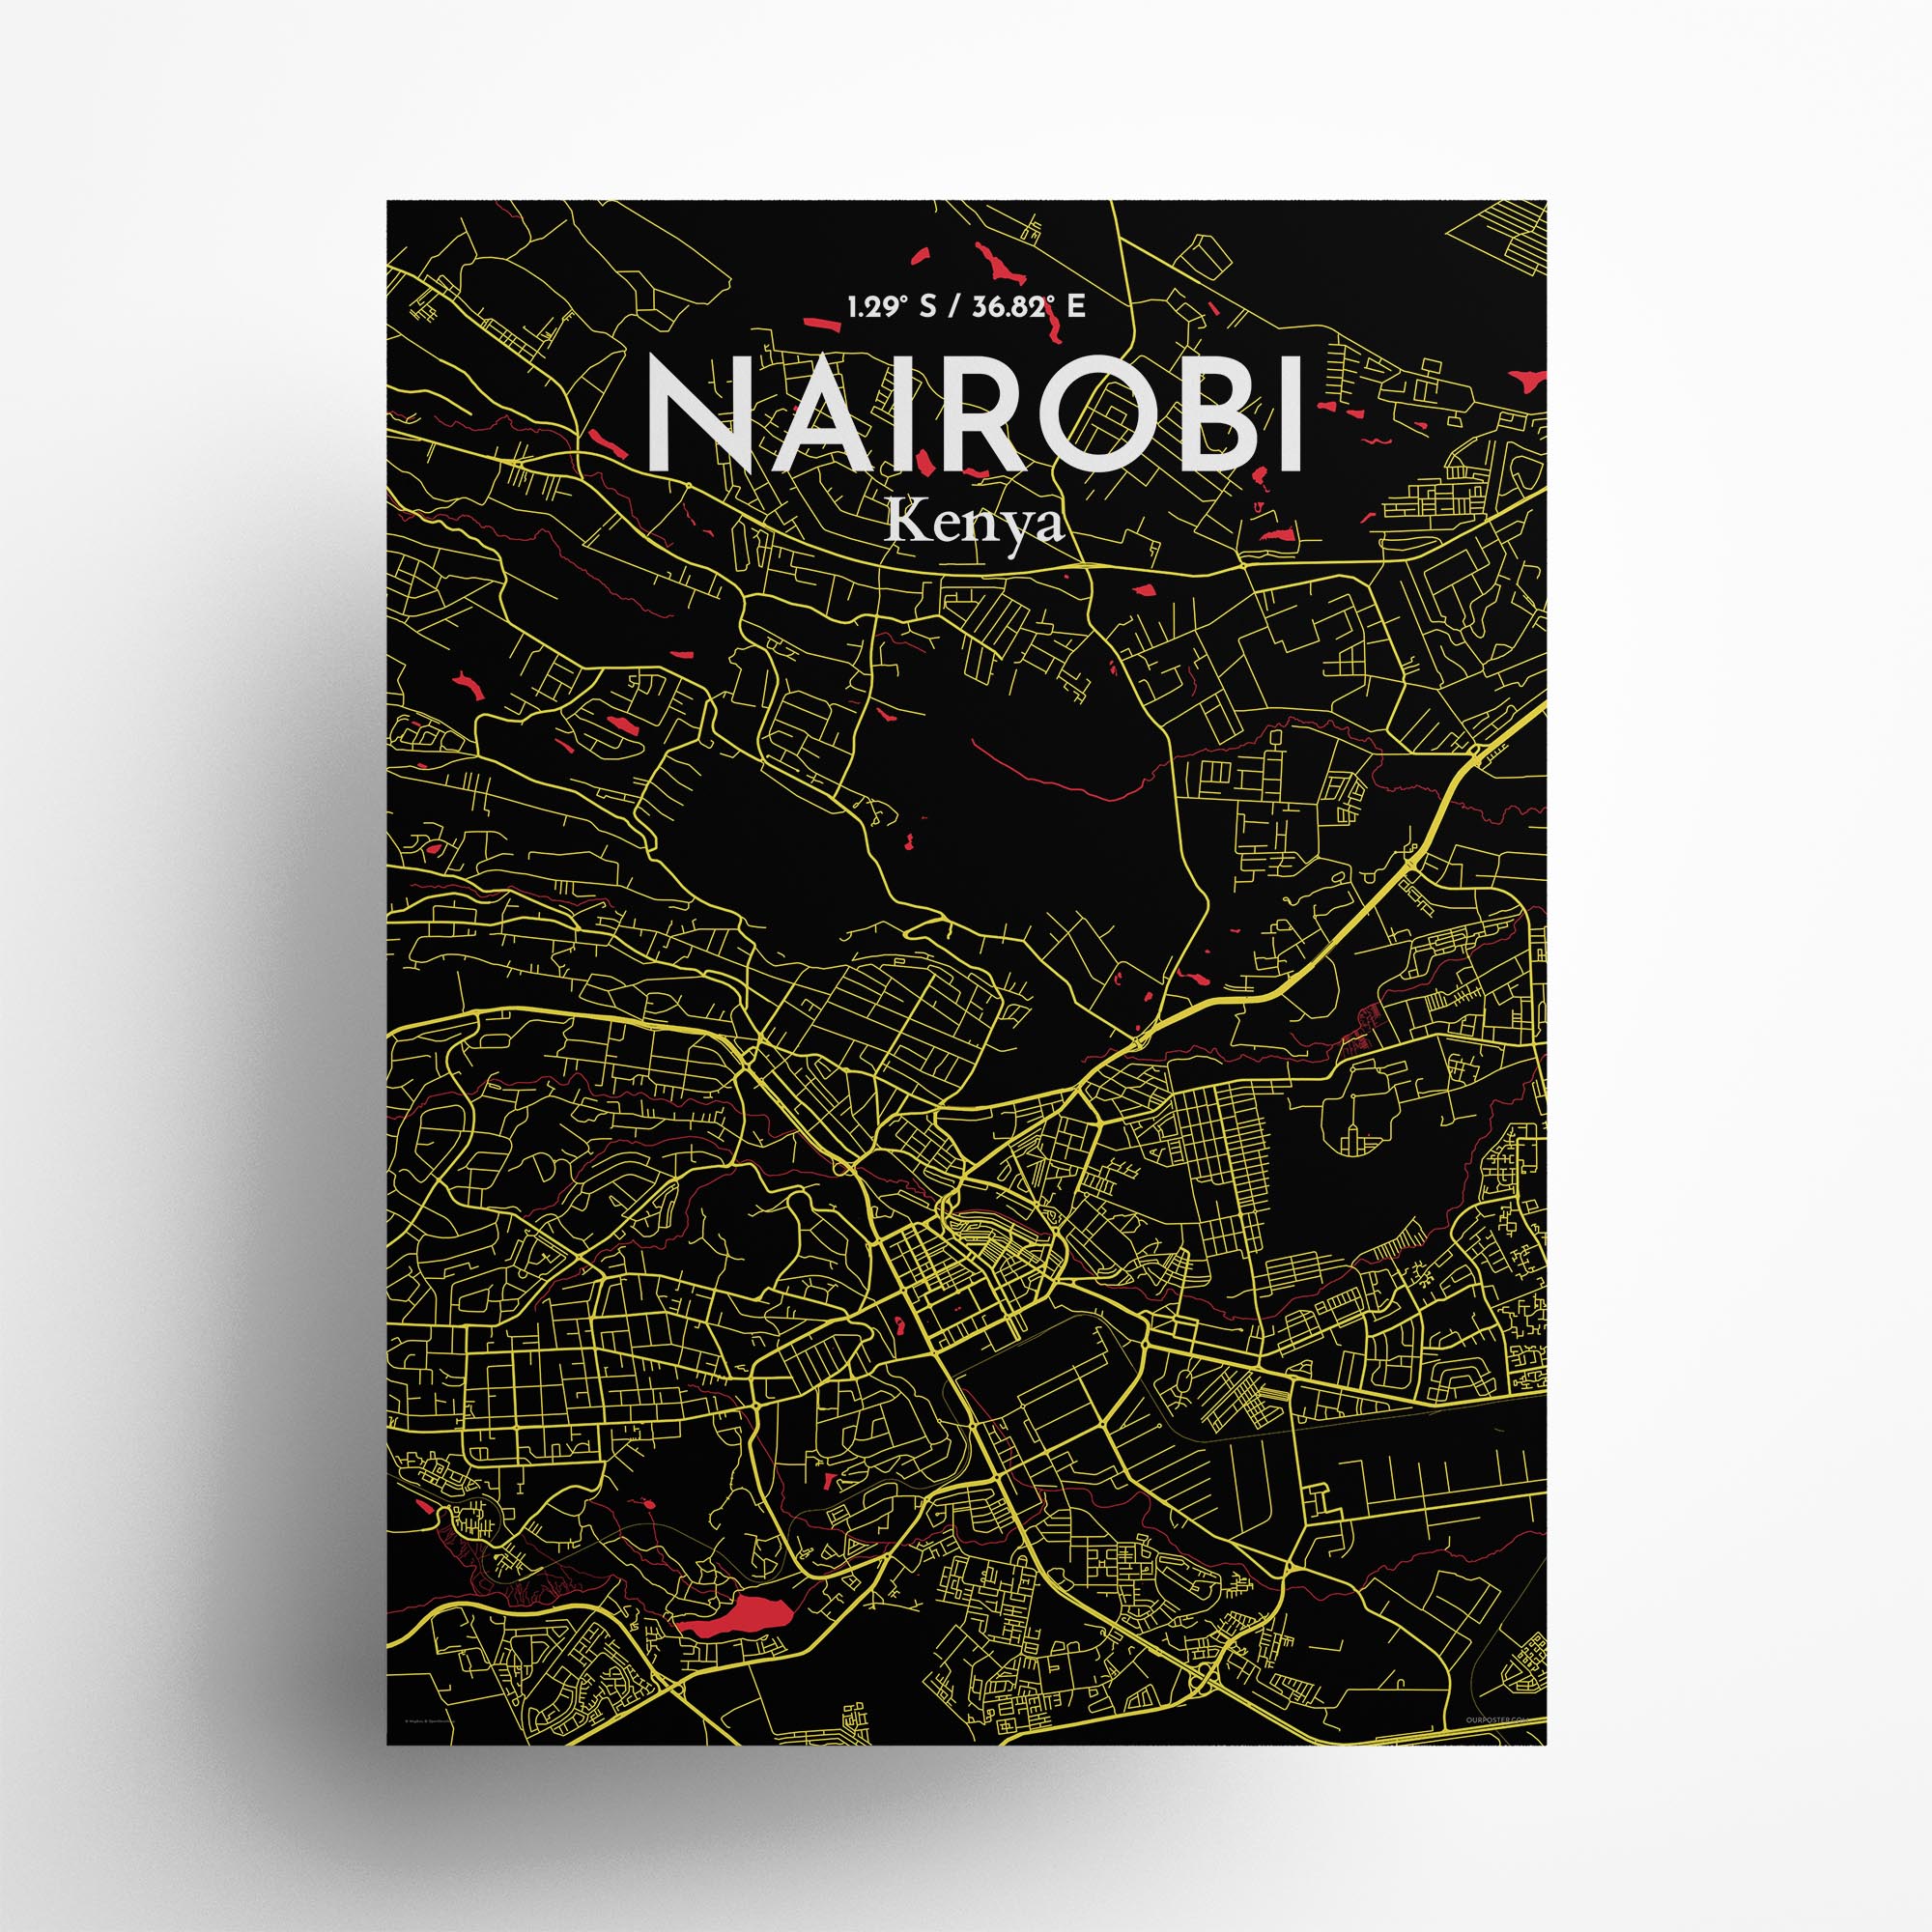 Nairobi city map poster in Contrast of size 18" x 24"